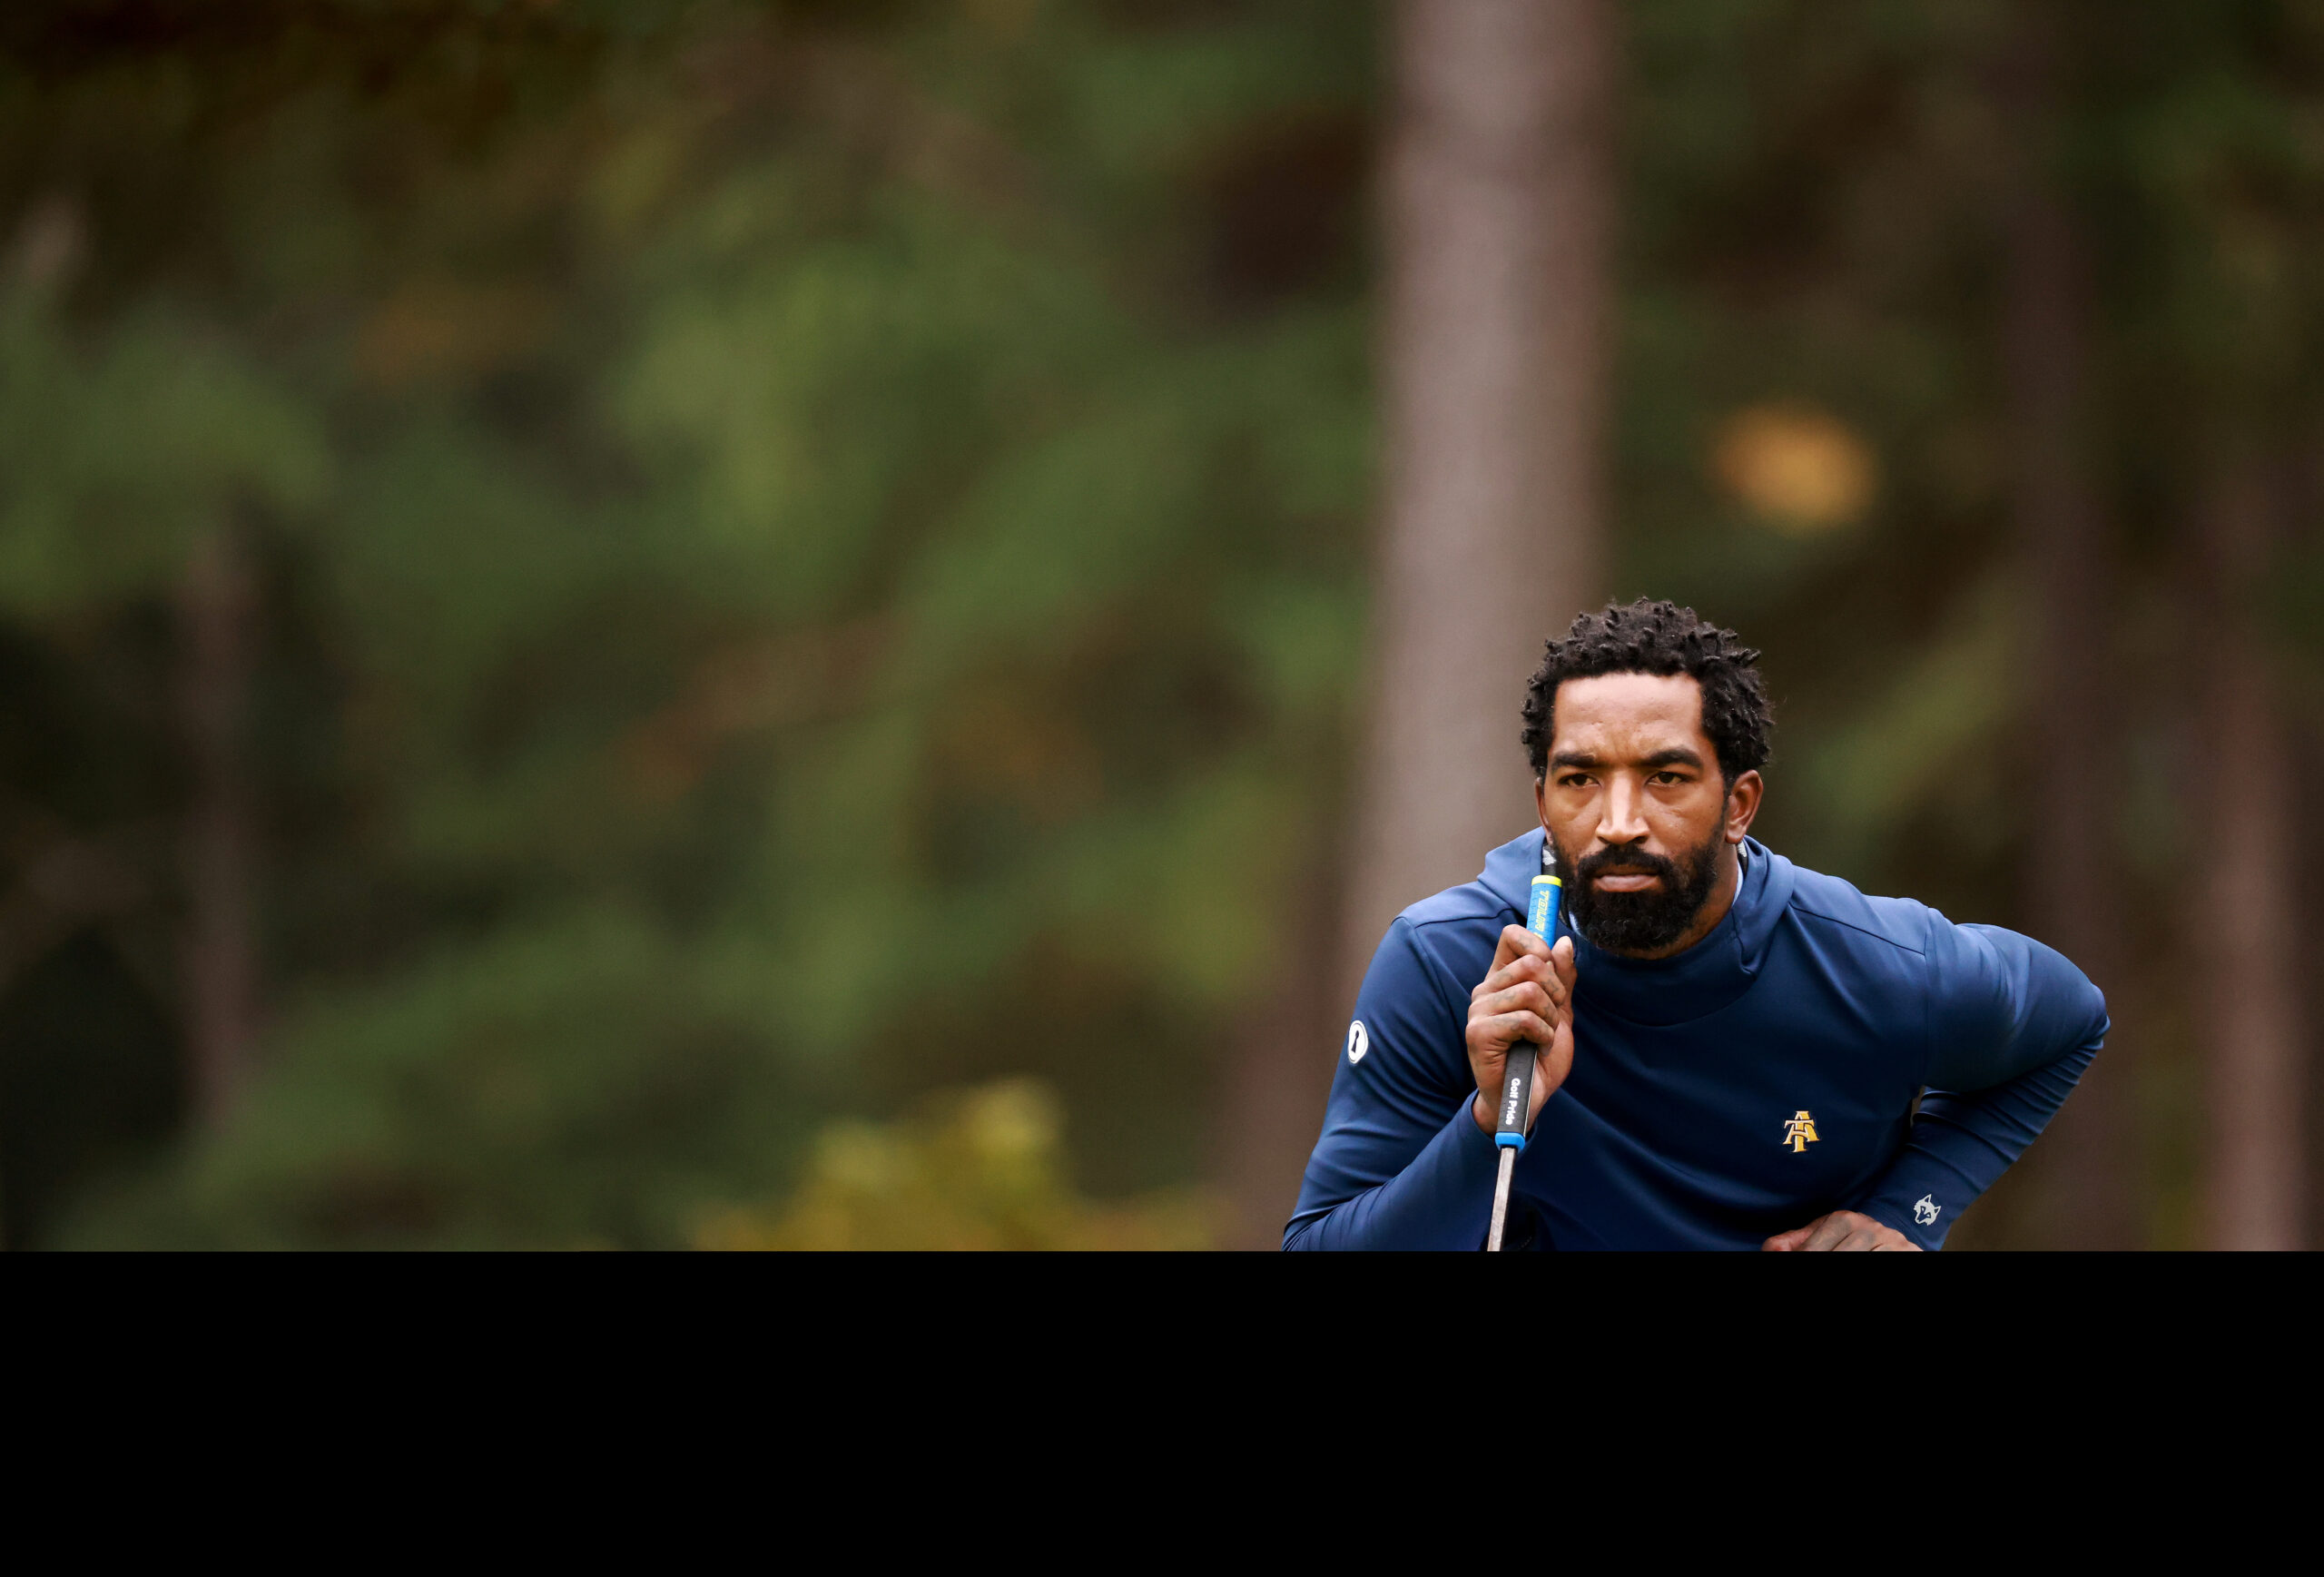 J.R. Smith, former NBA player who became a college golfer, gets groundbreaking Lululemon NIL deal